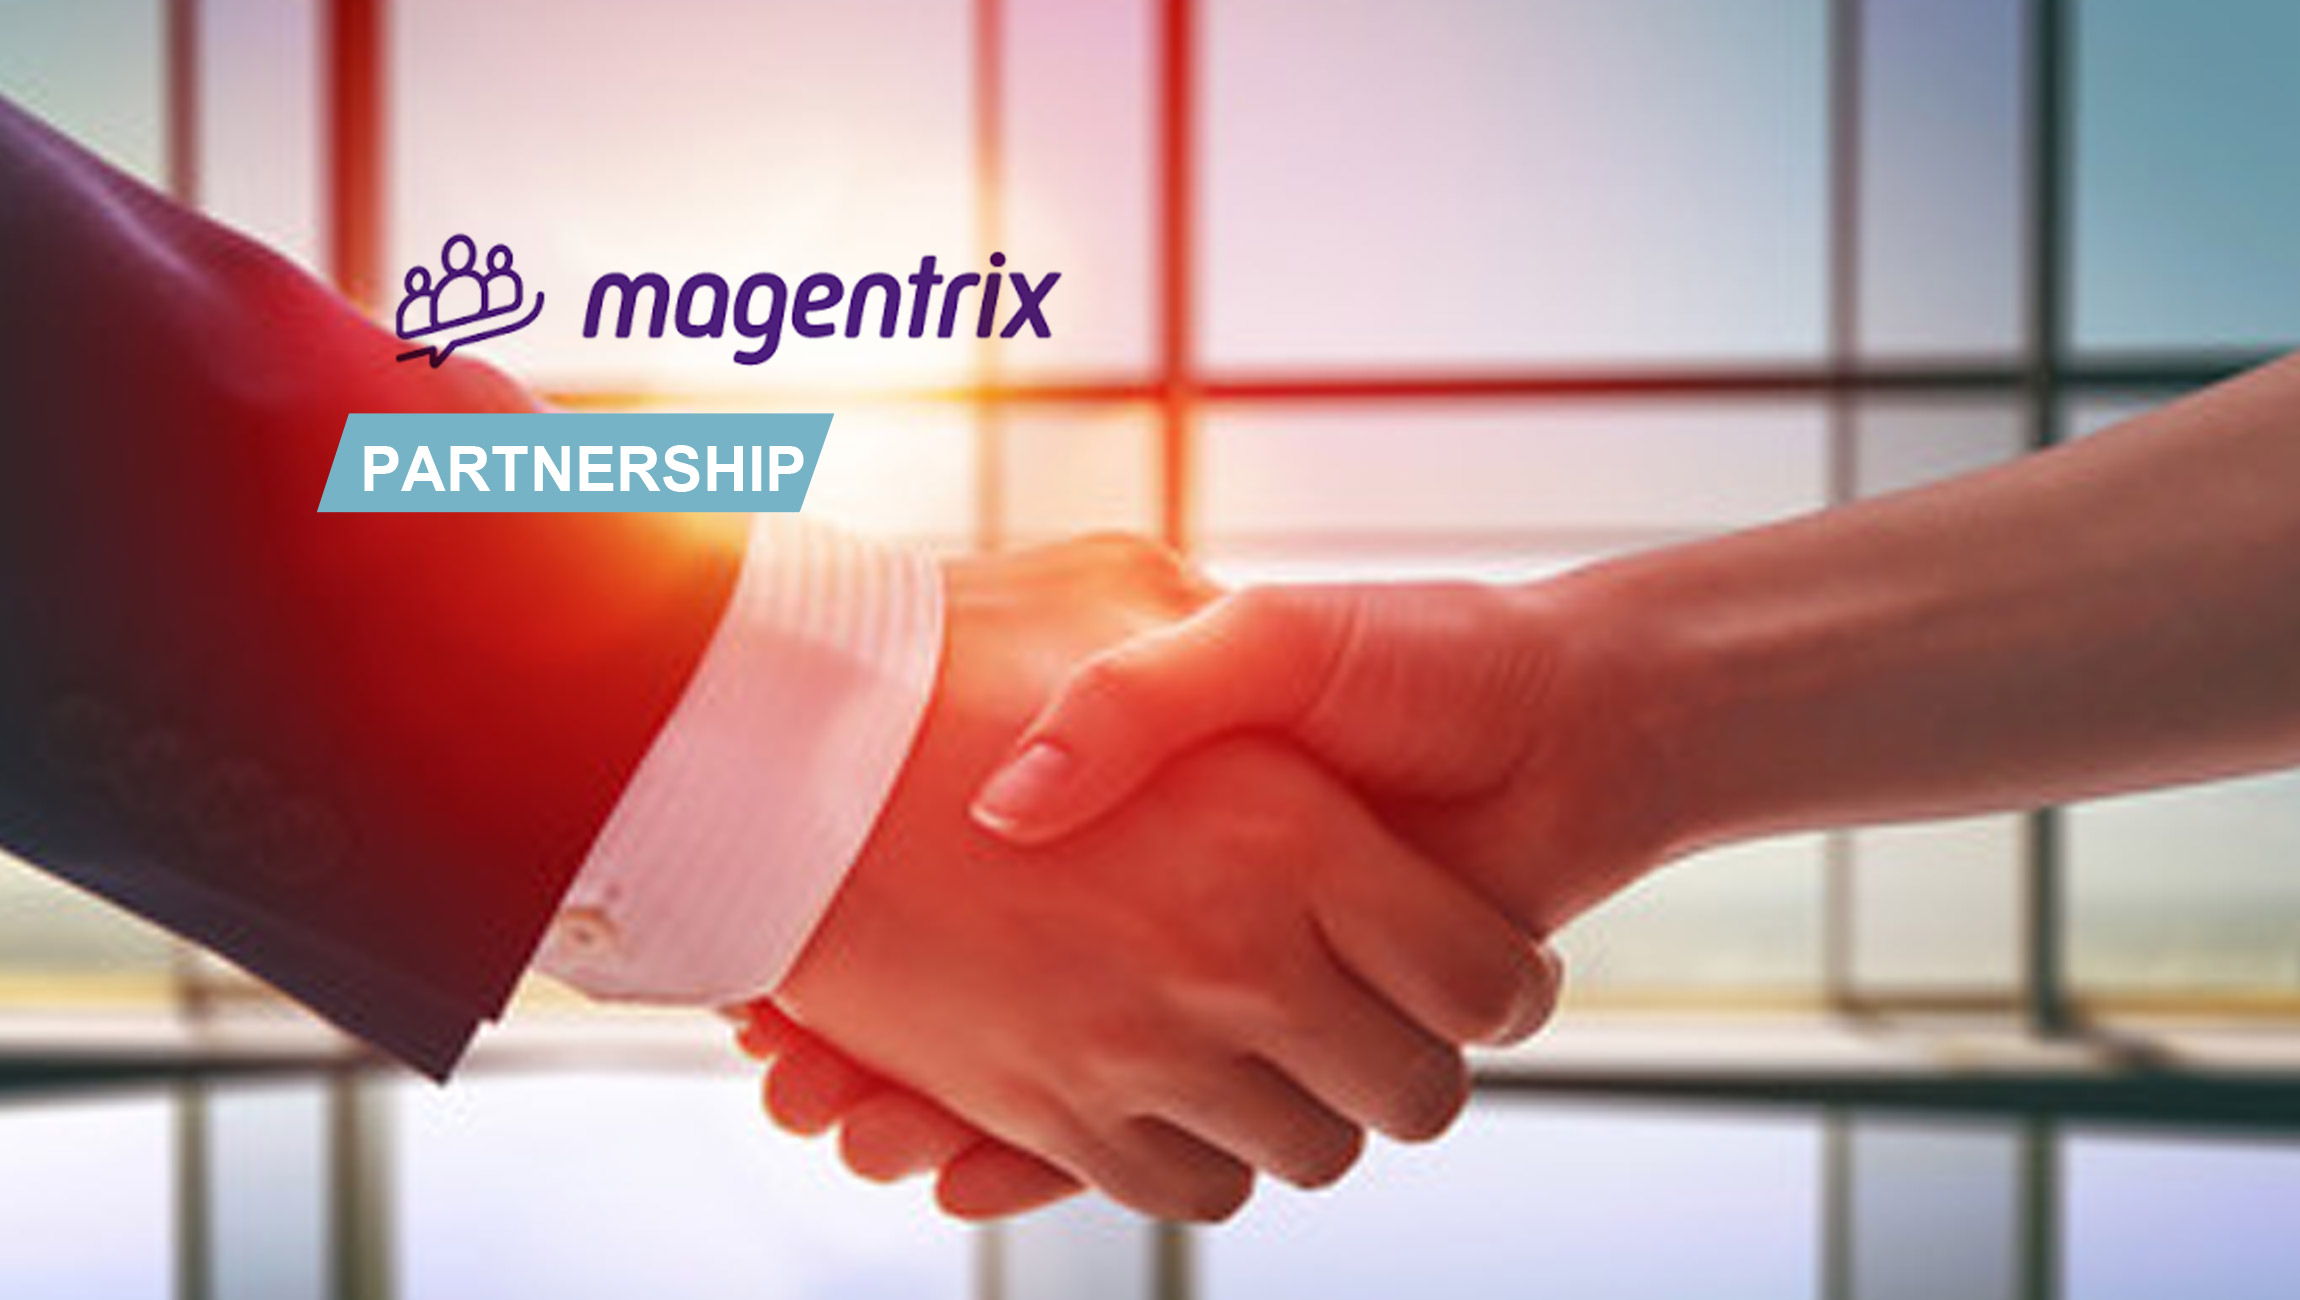 Magentrix Continues to Innovate As They Are Named a Leader Again in Partner Management by G2